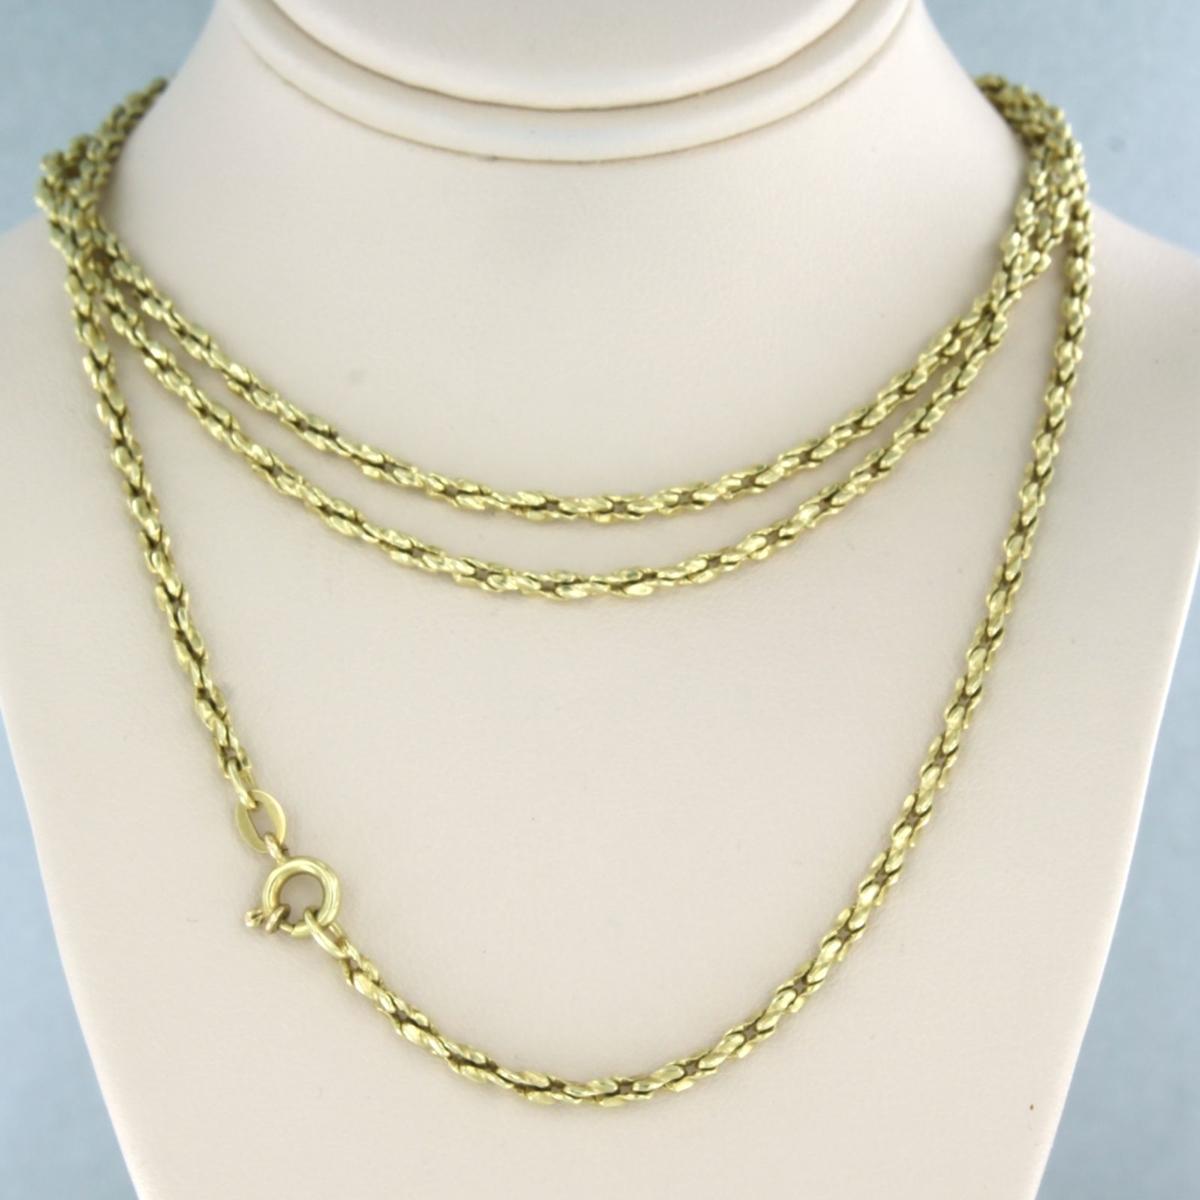 14k yellow gold necklace - 80 cm long

detailed description

the necklace is 80 cm long and 2.2 mm wide

weight 18.1 grams

Hallmark present, tested and guaranteed 14k gold

The necklace is in excellent condition
B14998